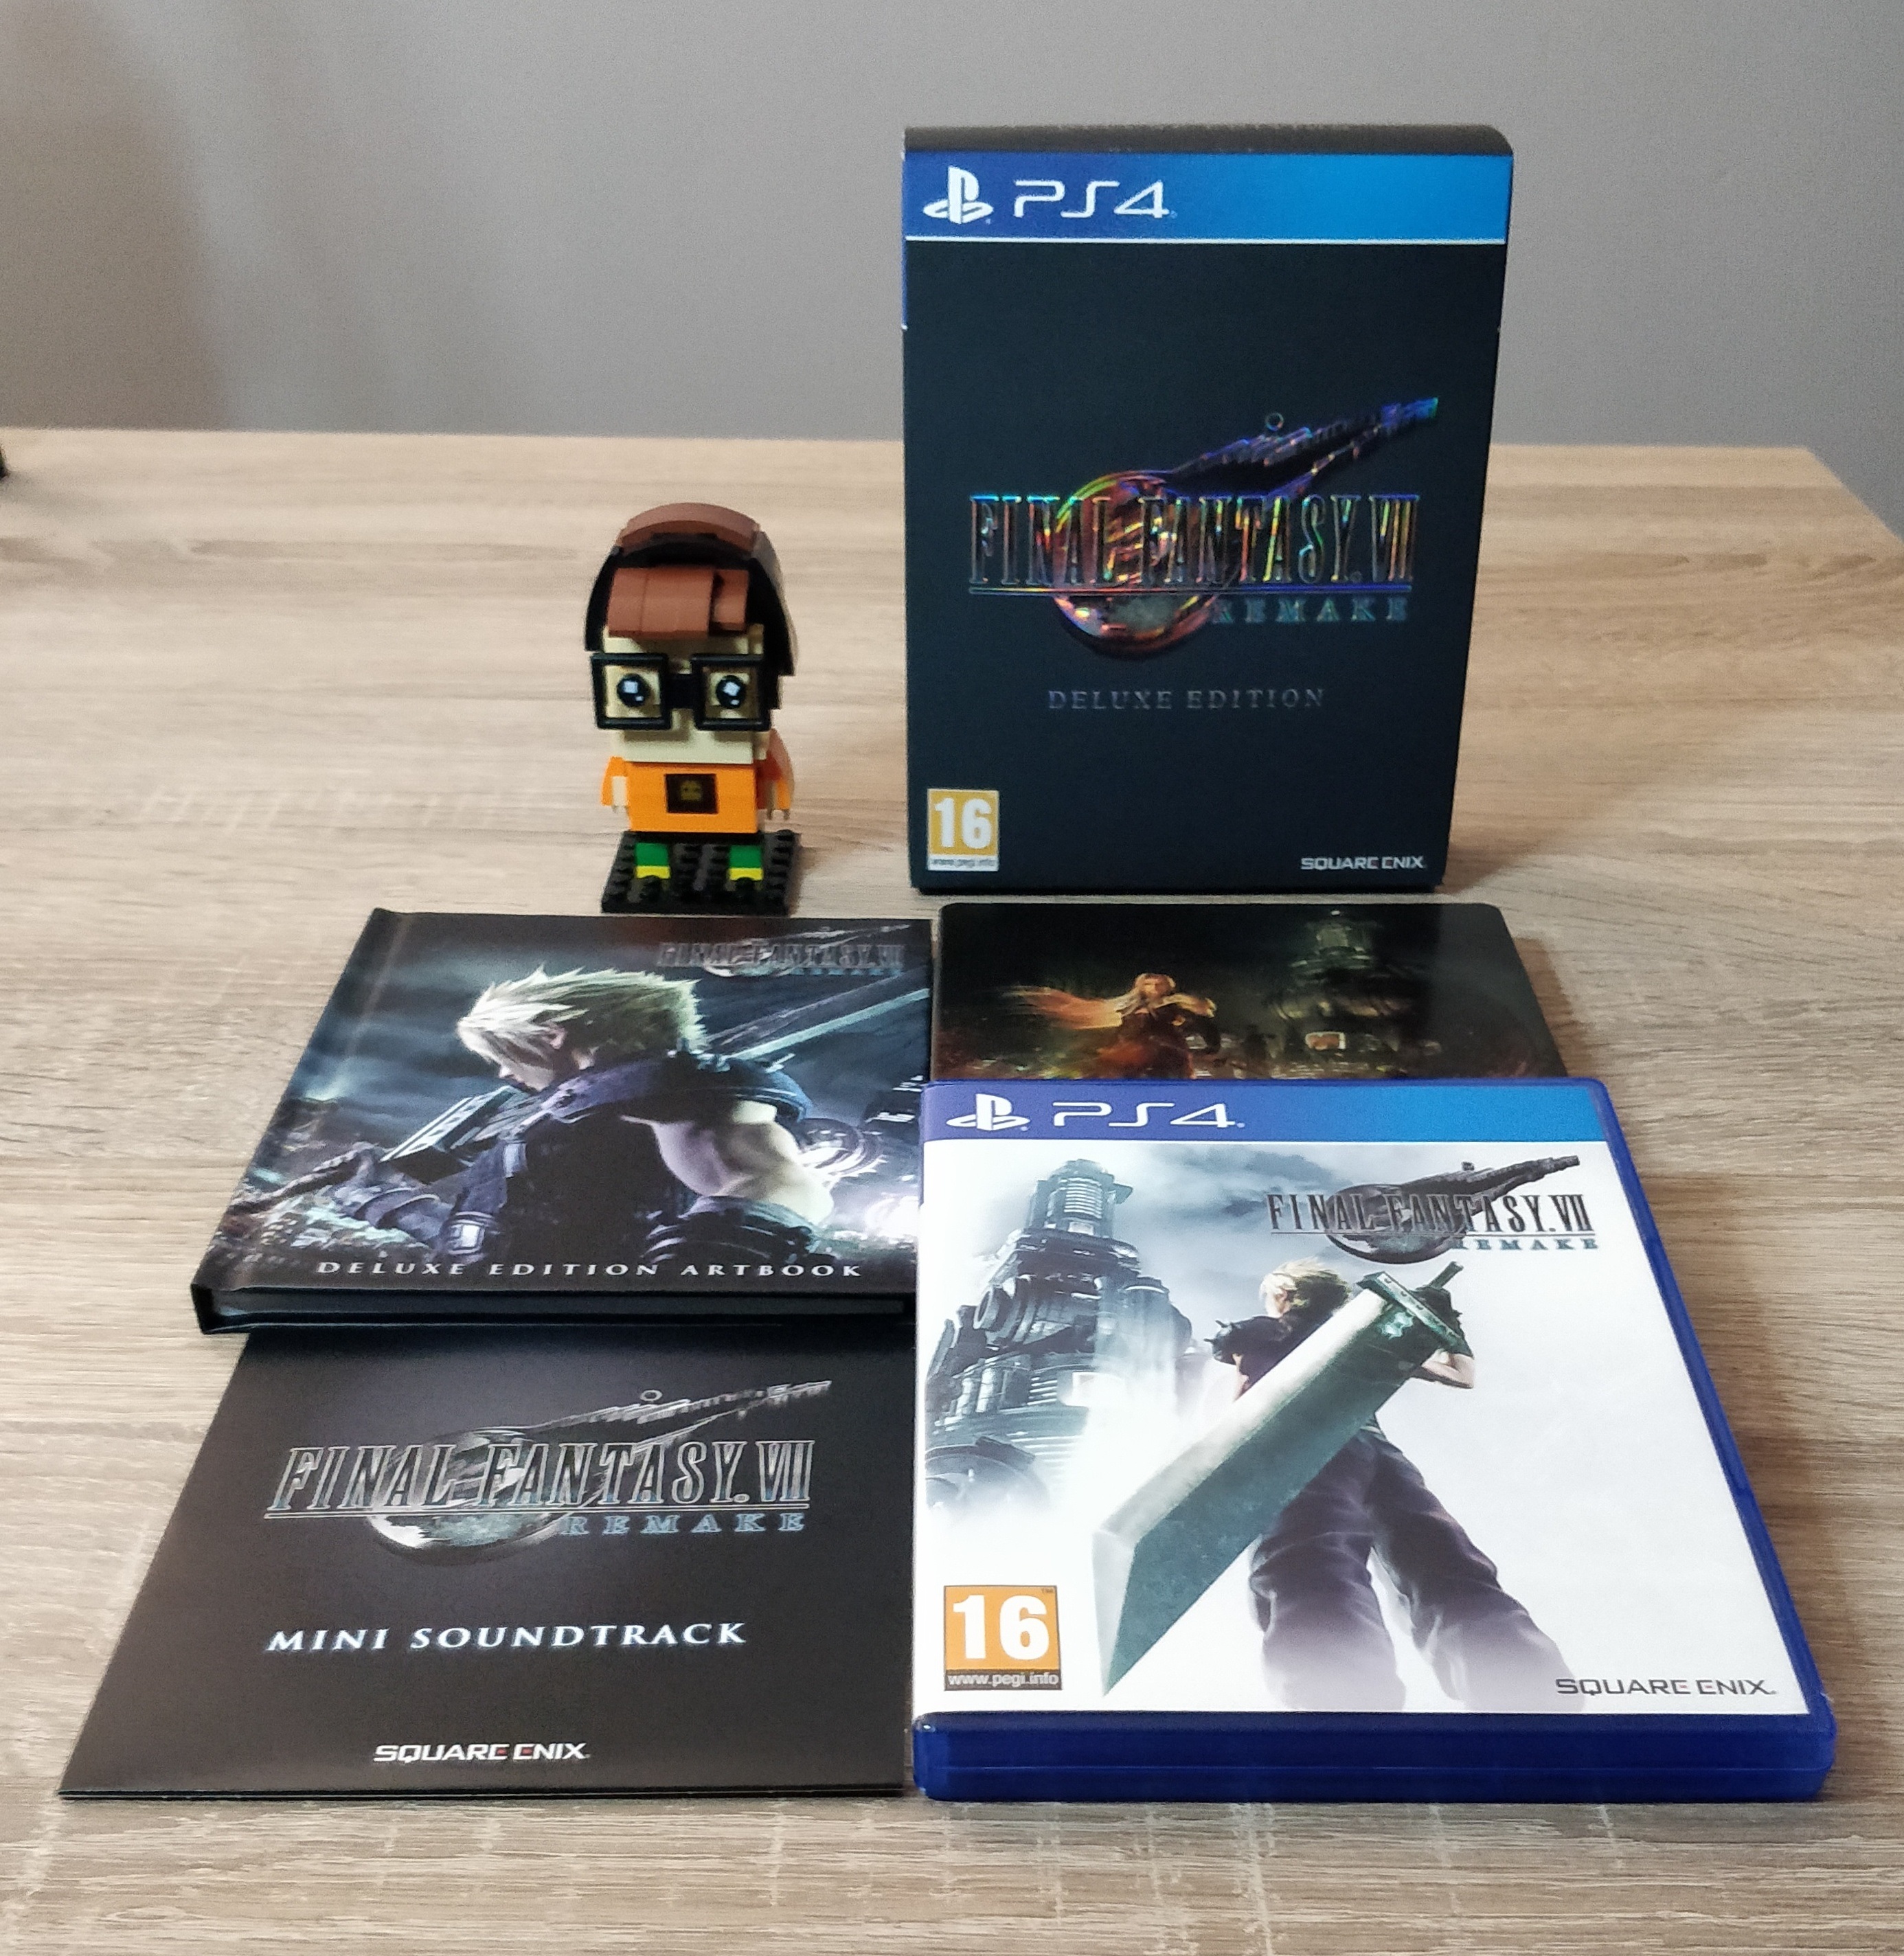 Unboxing: Final Fantasy VII Remake Deluxe Edition for PS4 